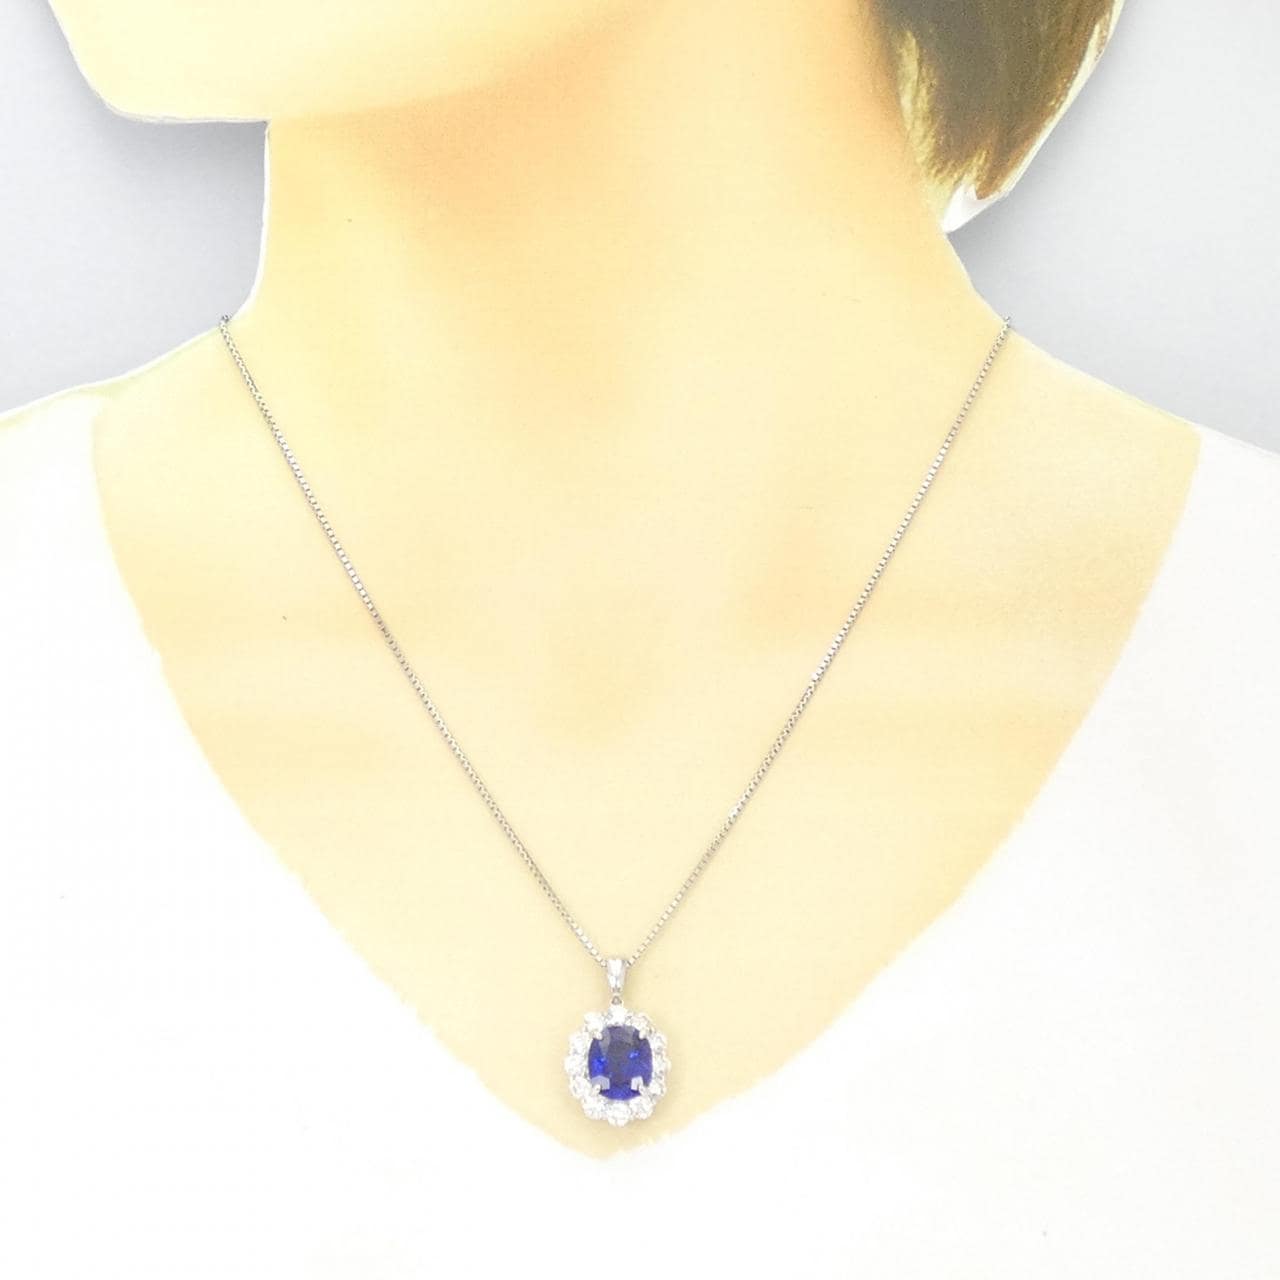 [Remake] PT Sapphire Necklace 4.68CT Made in Sri Lanka